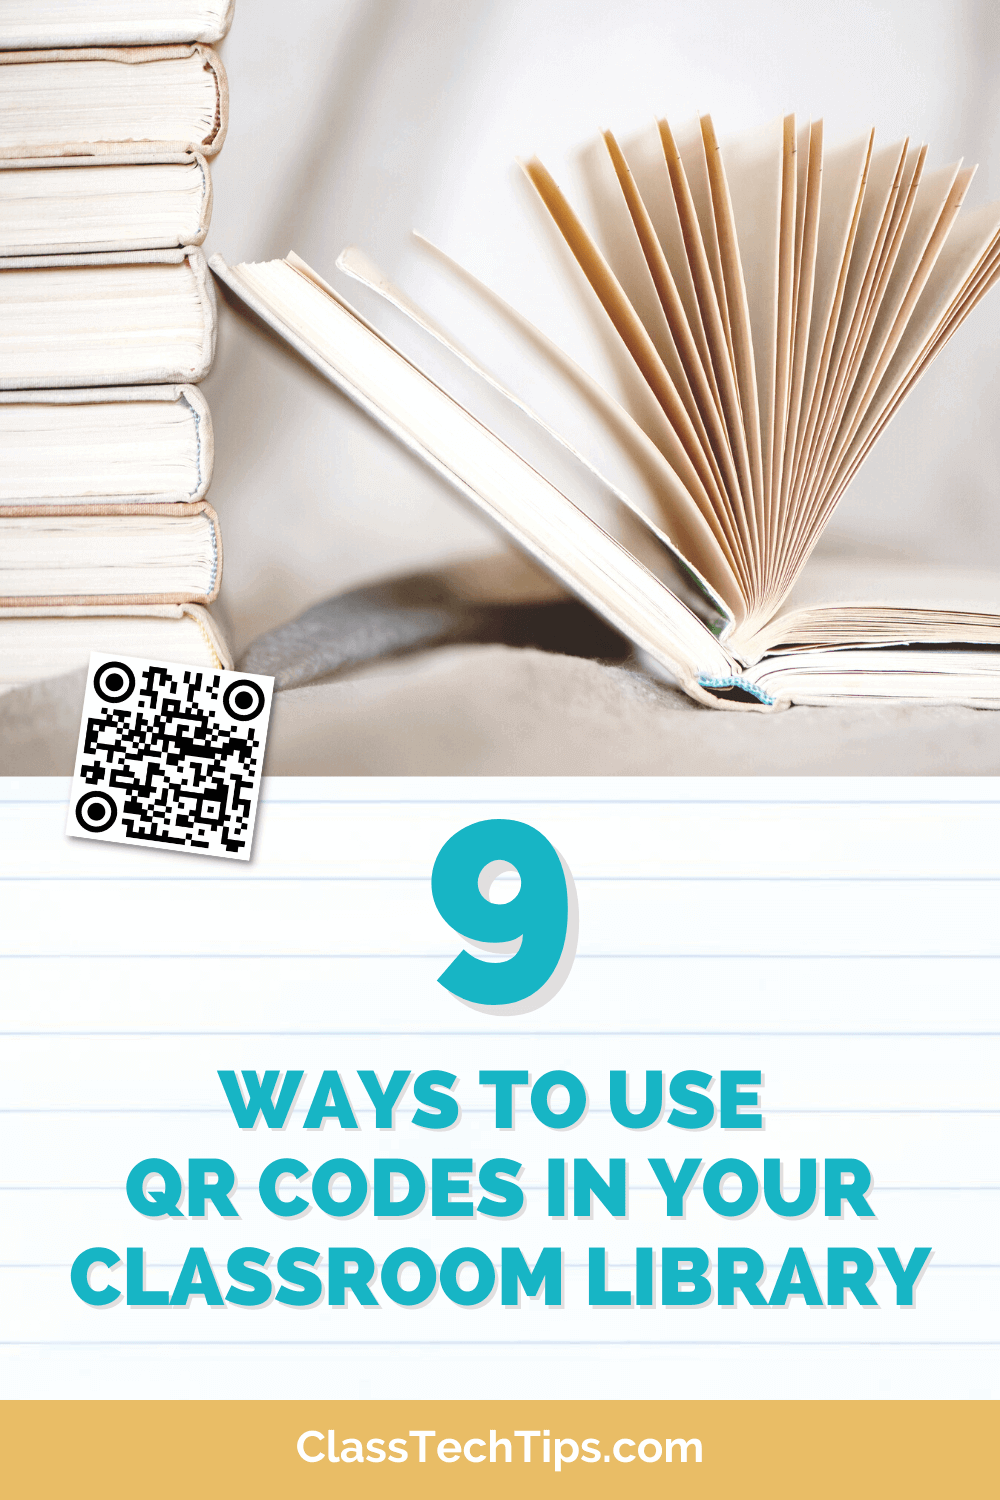 A stack of books with pages flipping, featuring a QR code, representing innovative ways to use QR codes in classroom libraries.